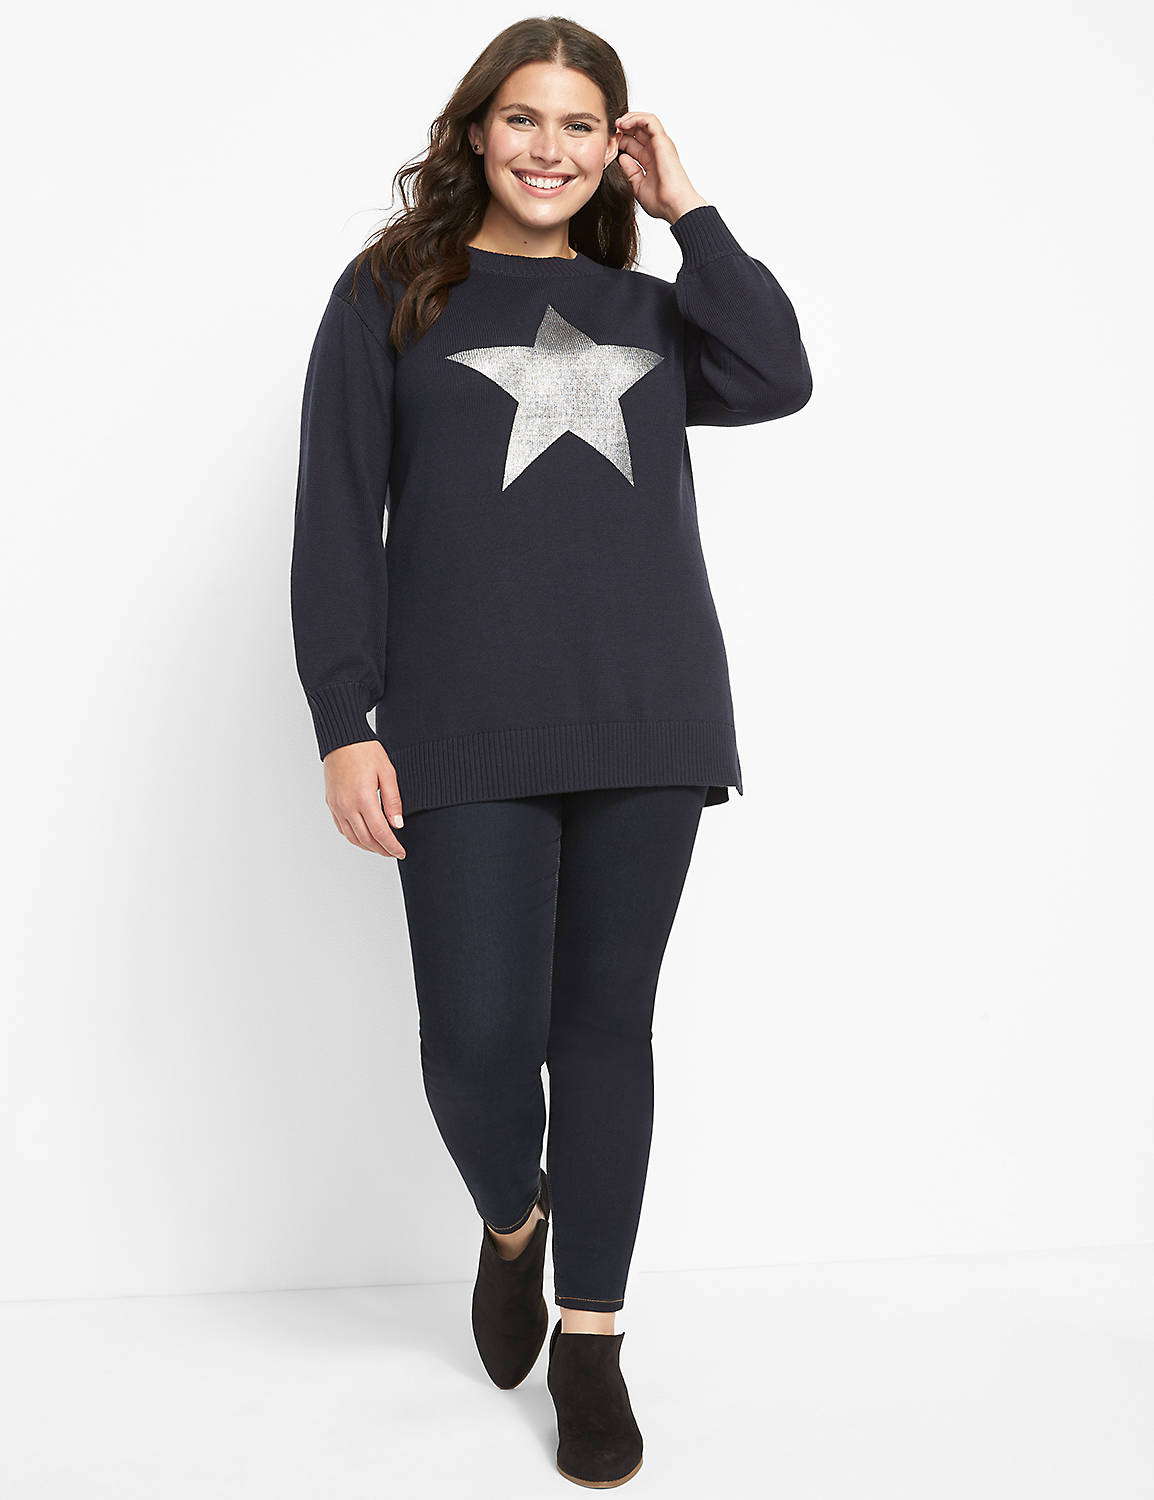 Star Tunic Sweater Product Image 3